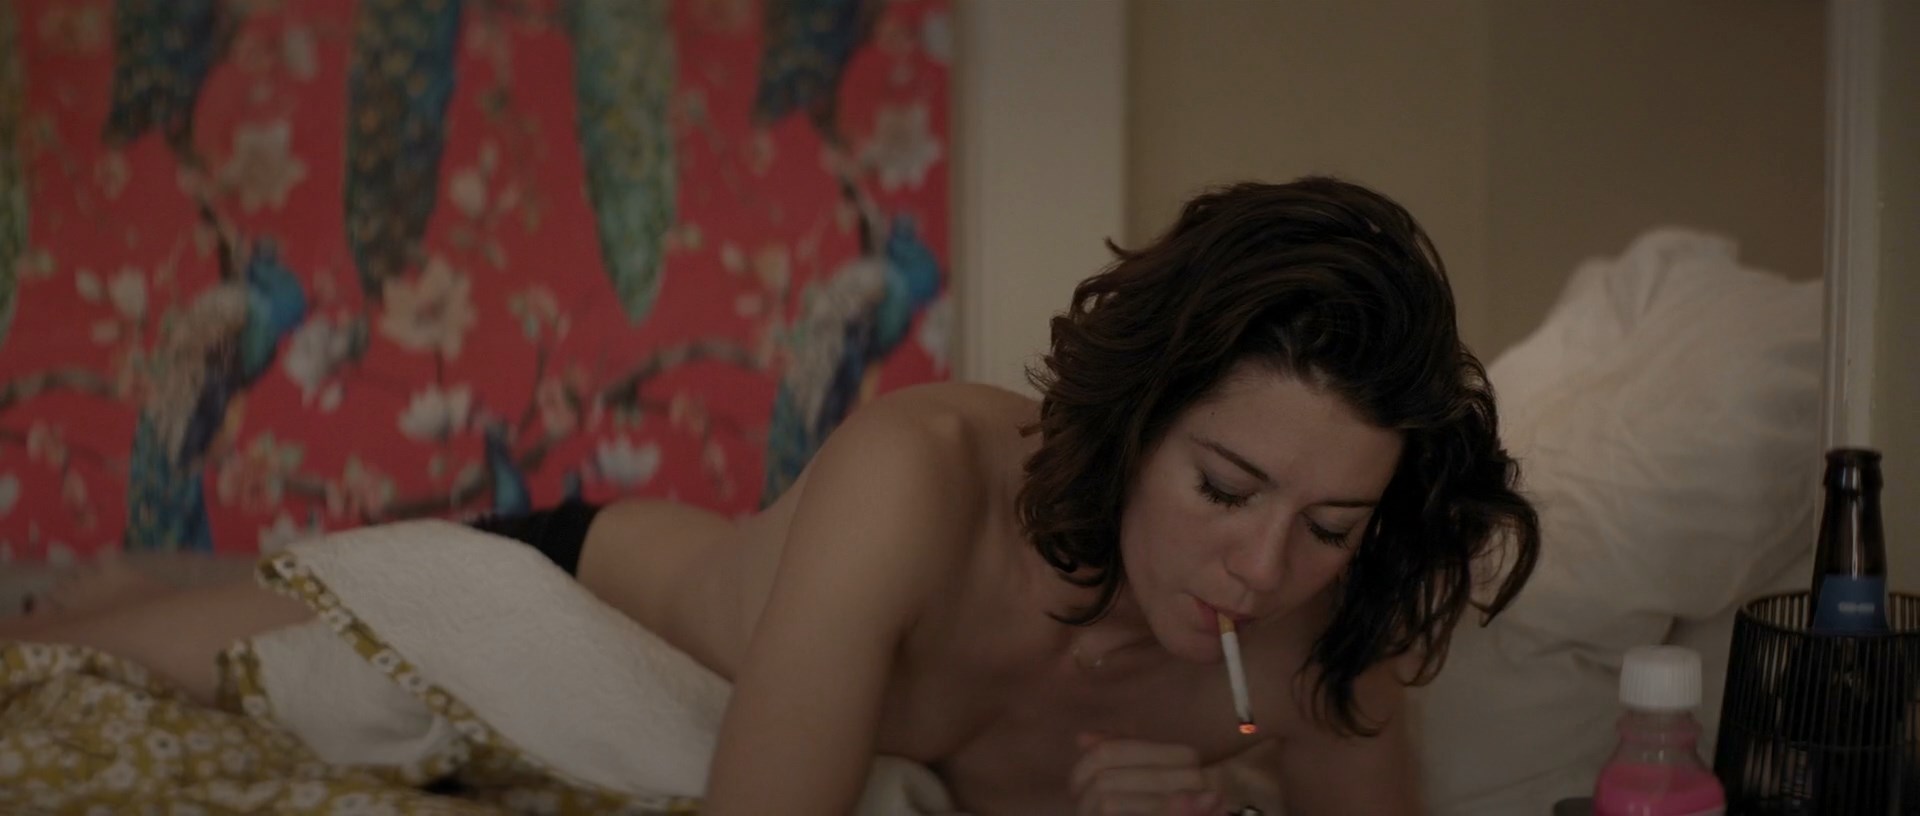 Mary of nude elizabeth winstead pictures Mary Elizabeth